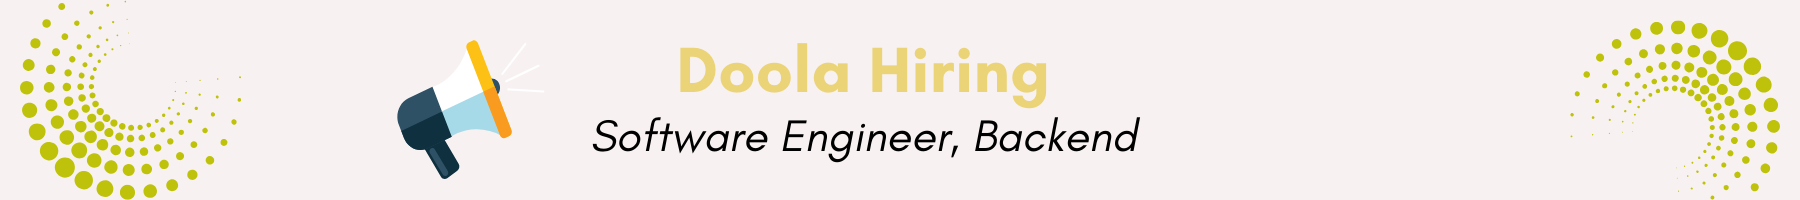 Yellow White Minimalist We Are Hiring Banner (1800 x 200 px) (5).png